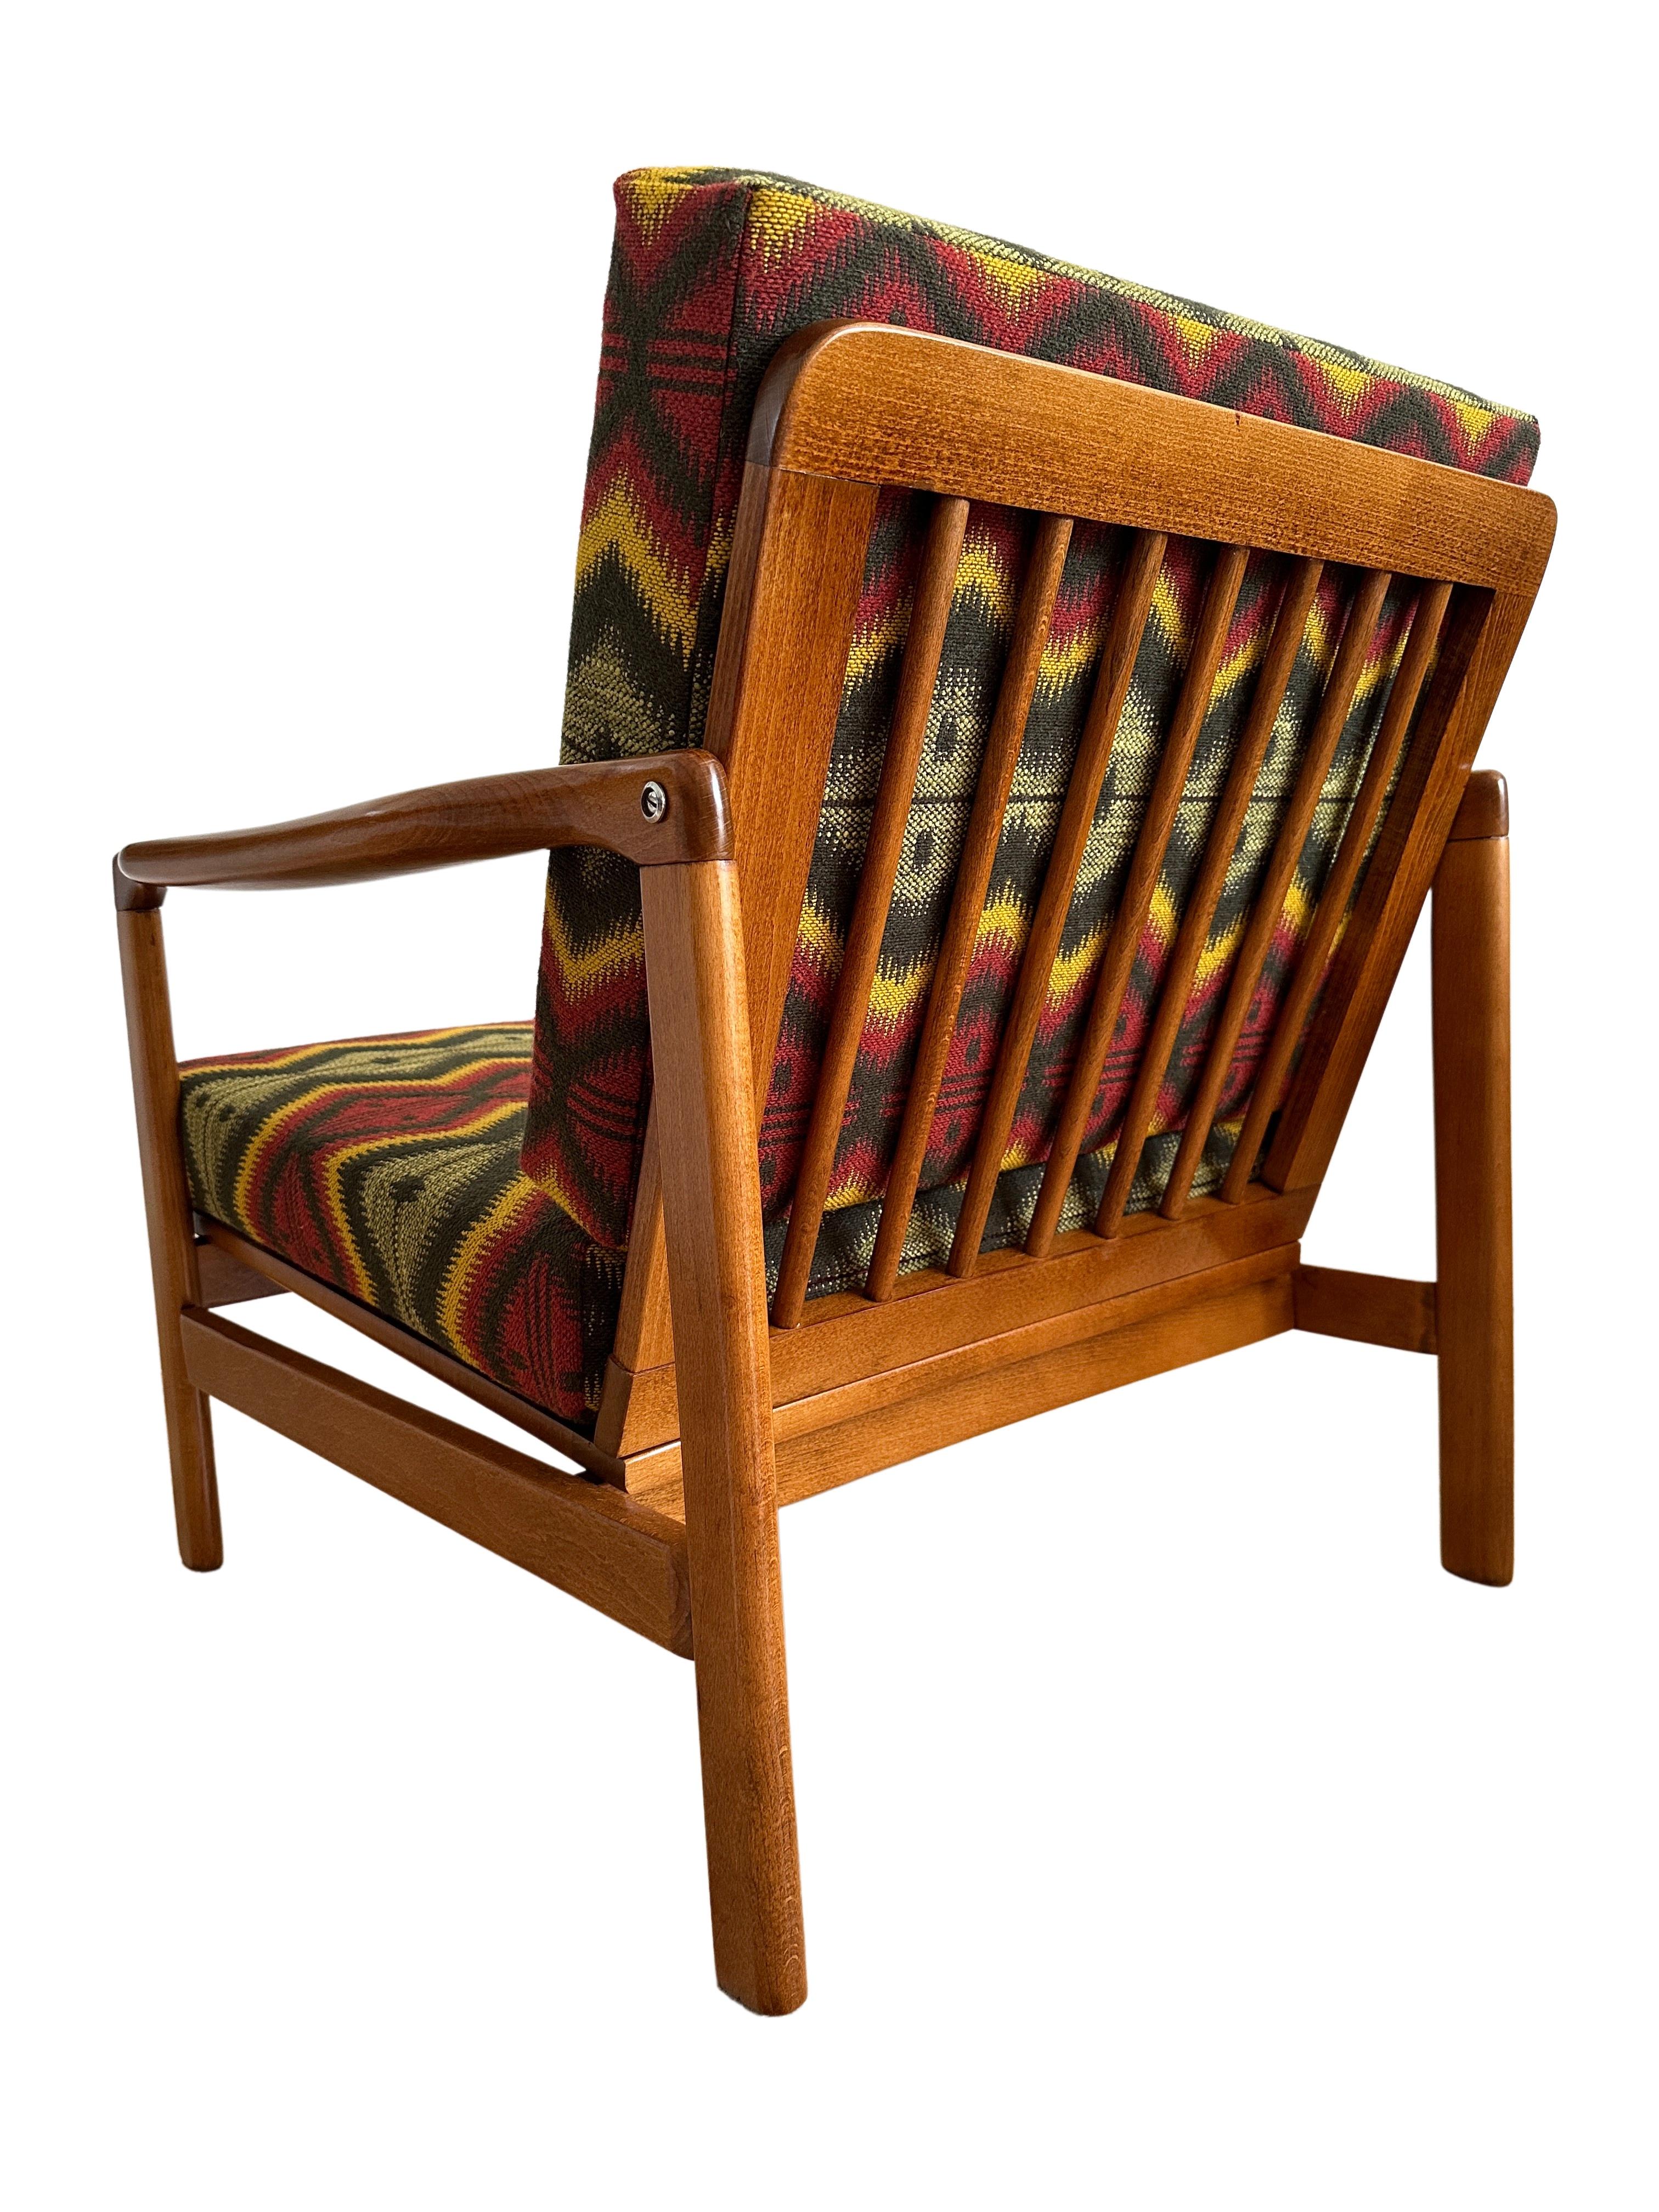 Set of Two Armchairs by Zenon Bączyk, Mind the Gap Upholstery, Europe, 1960s For Sale 2